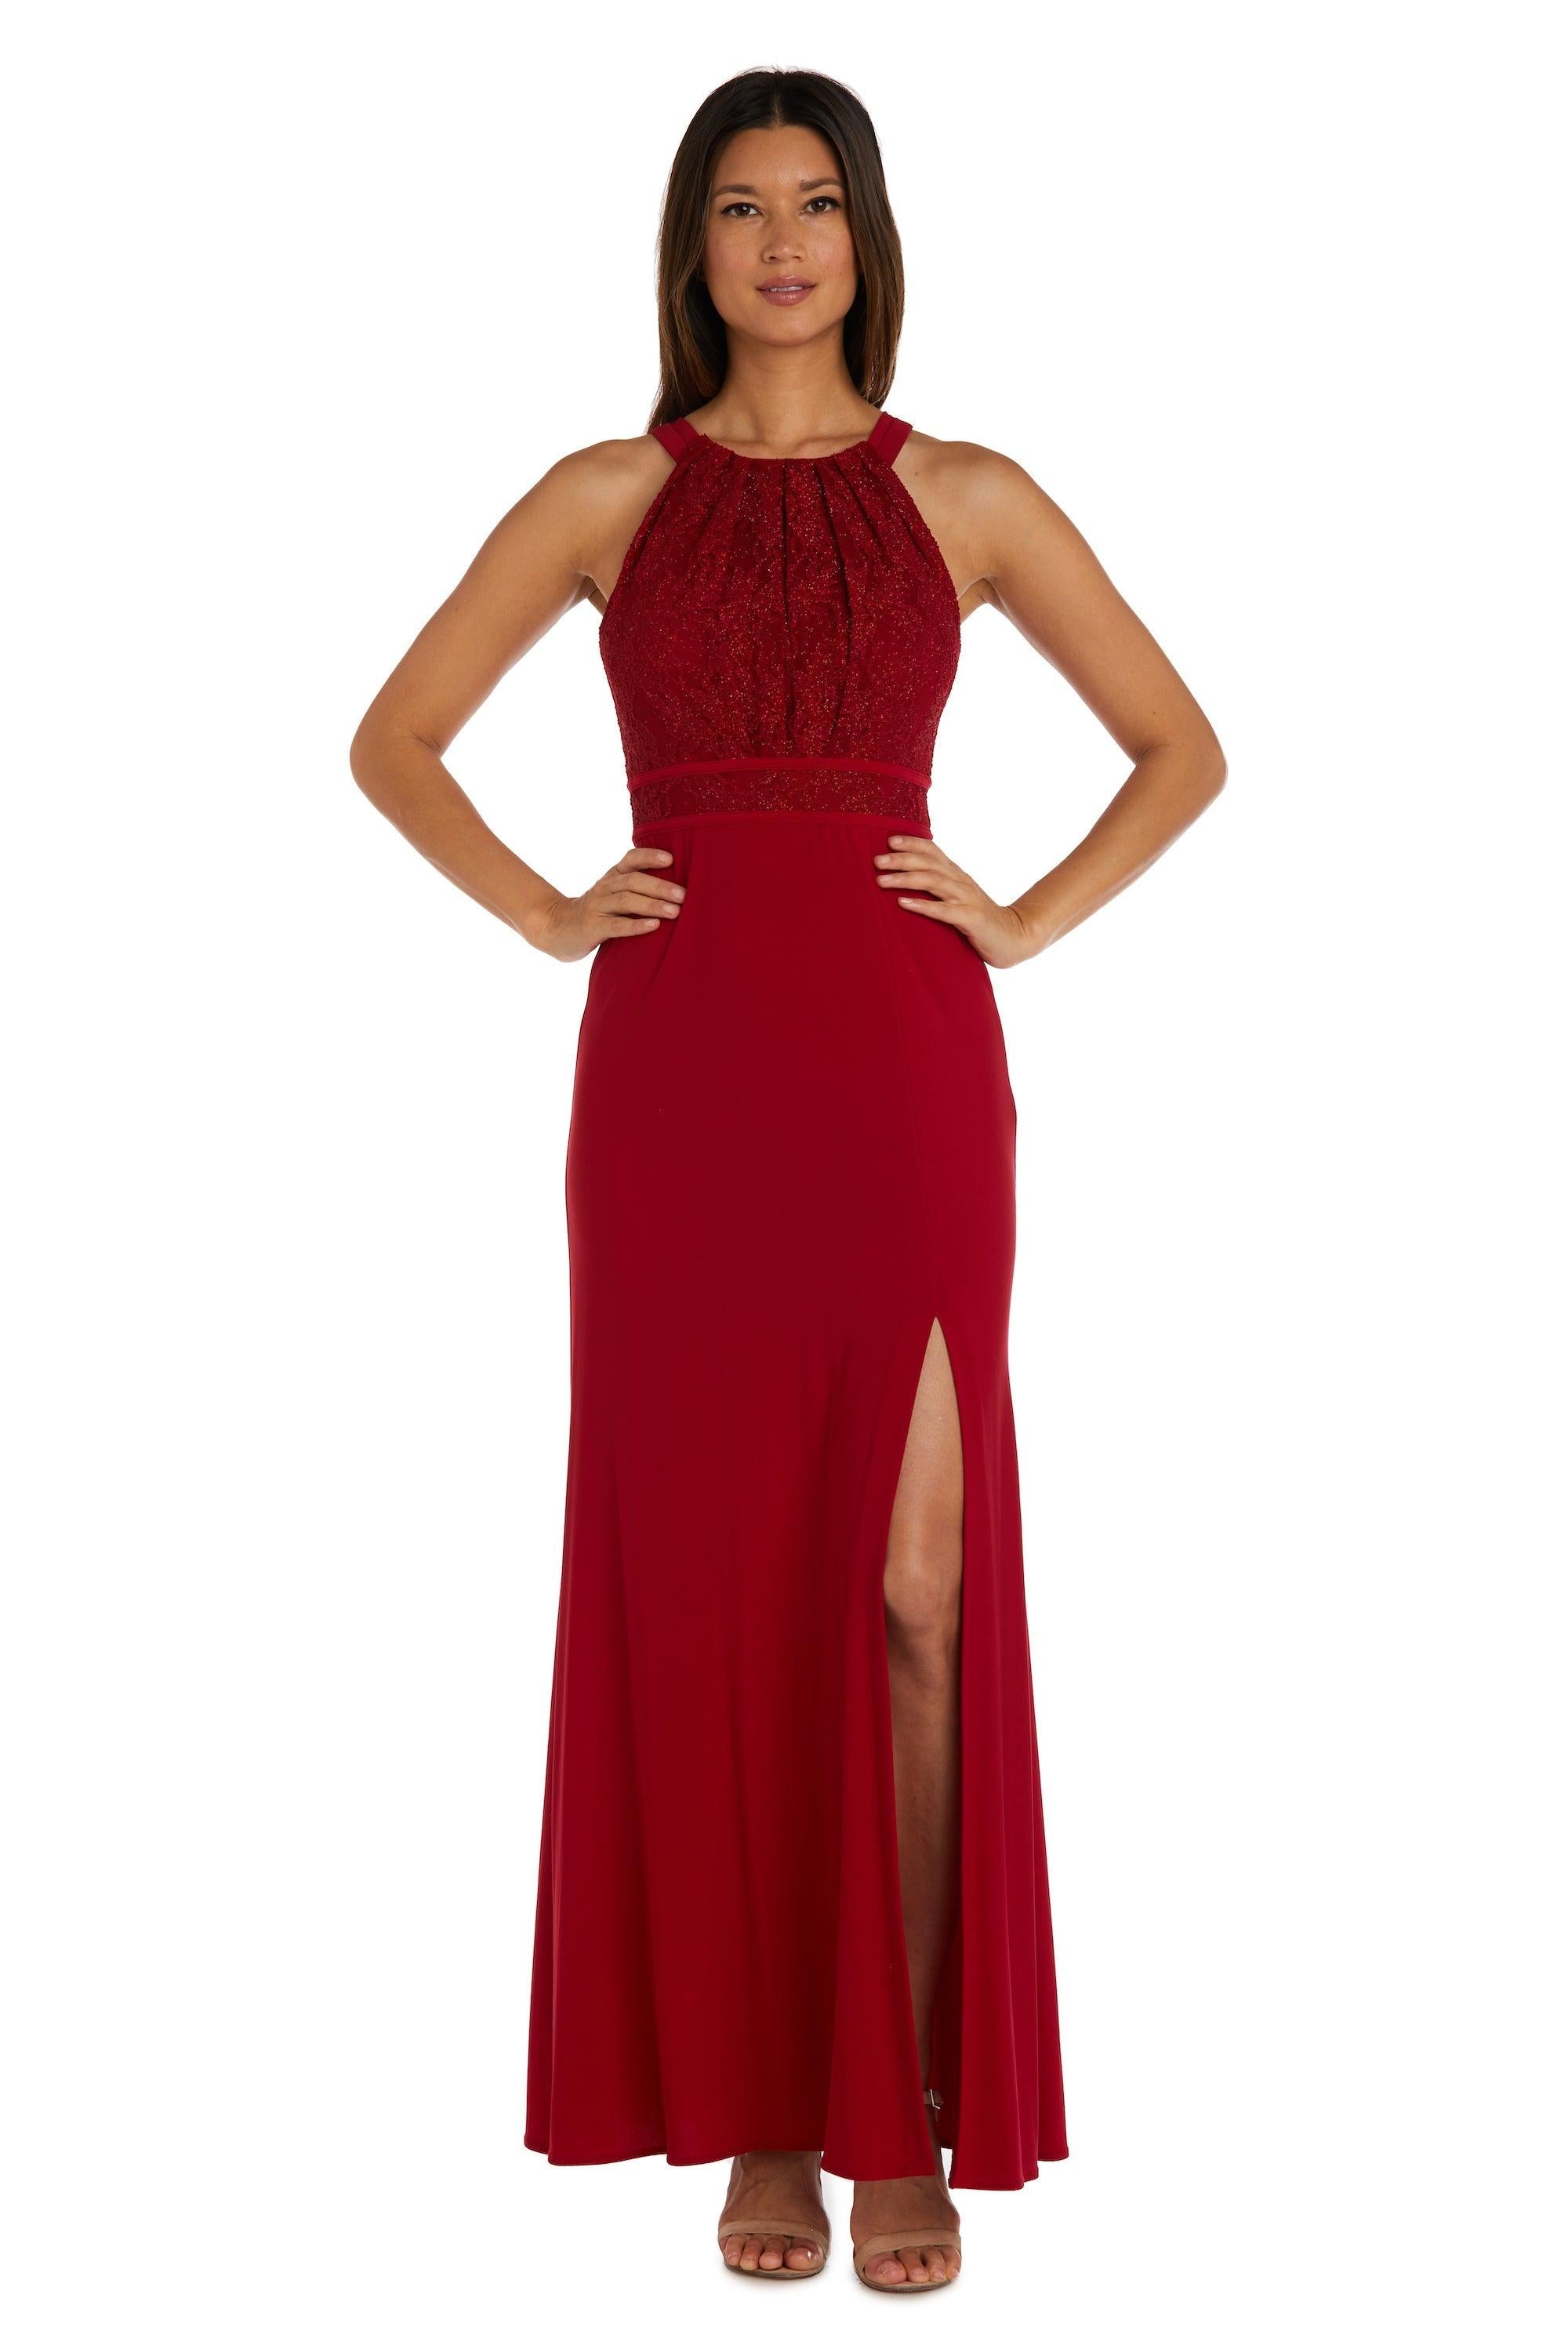 Nightway Long Halter Pleated Lace Formal Gown 21799 | The Dress Outlet